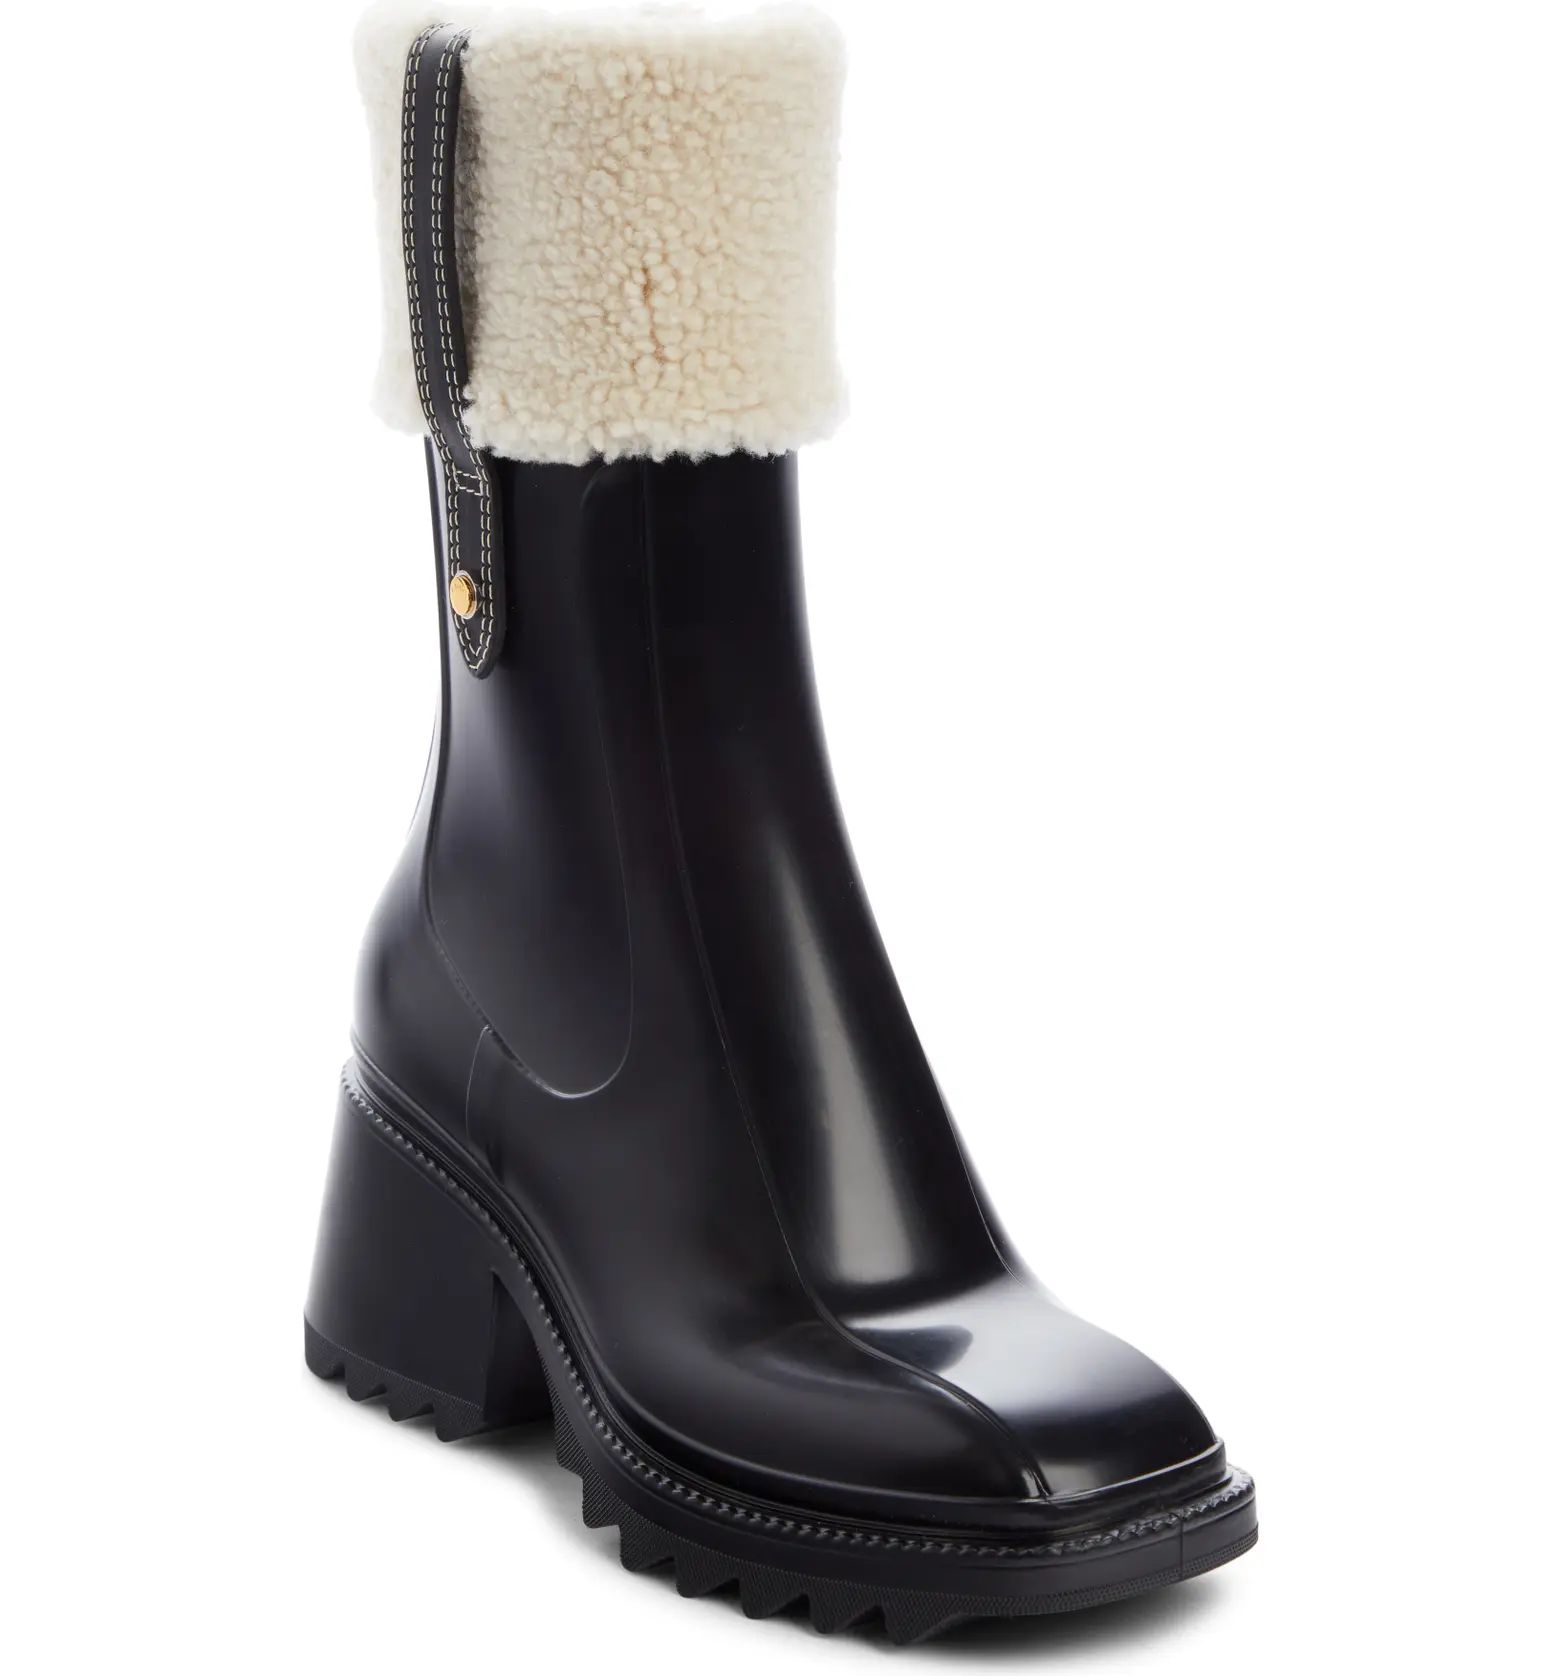 Chloé Betty Genuine Shearling Cuff Water Resistant Rain Boot | Nordstrom | Nordstrom